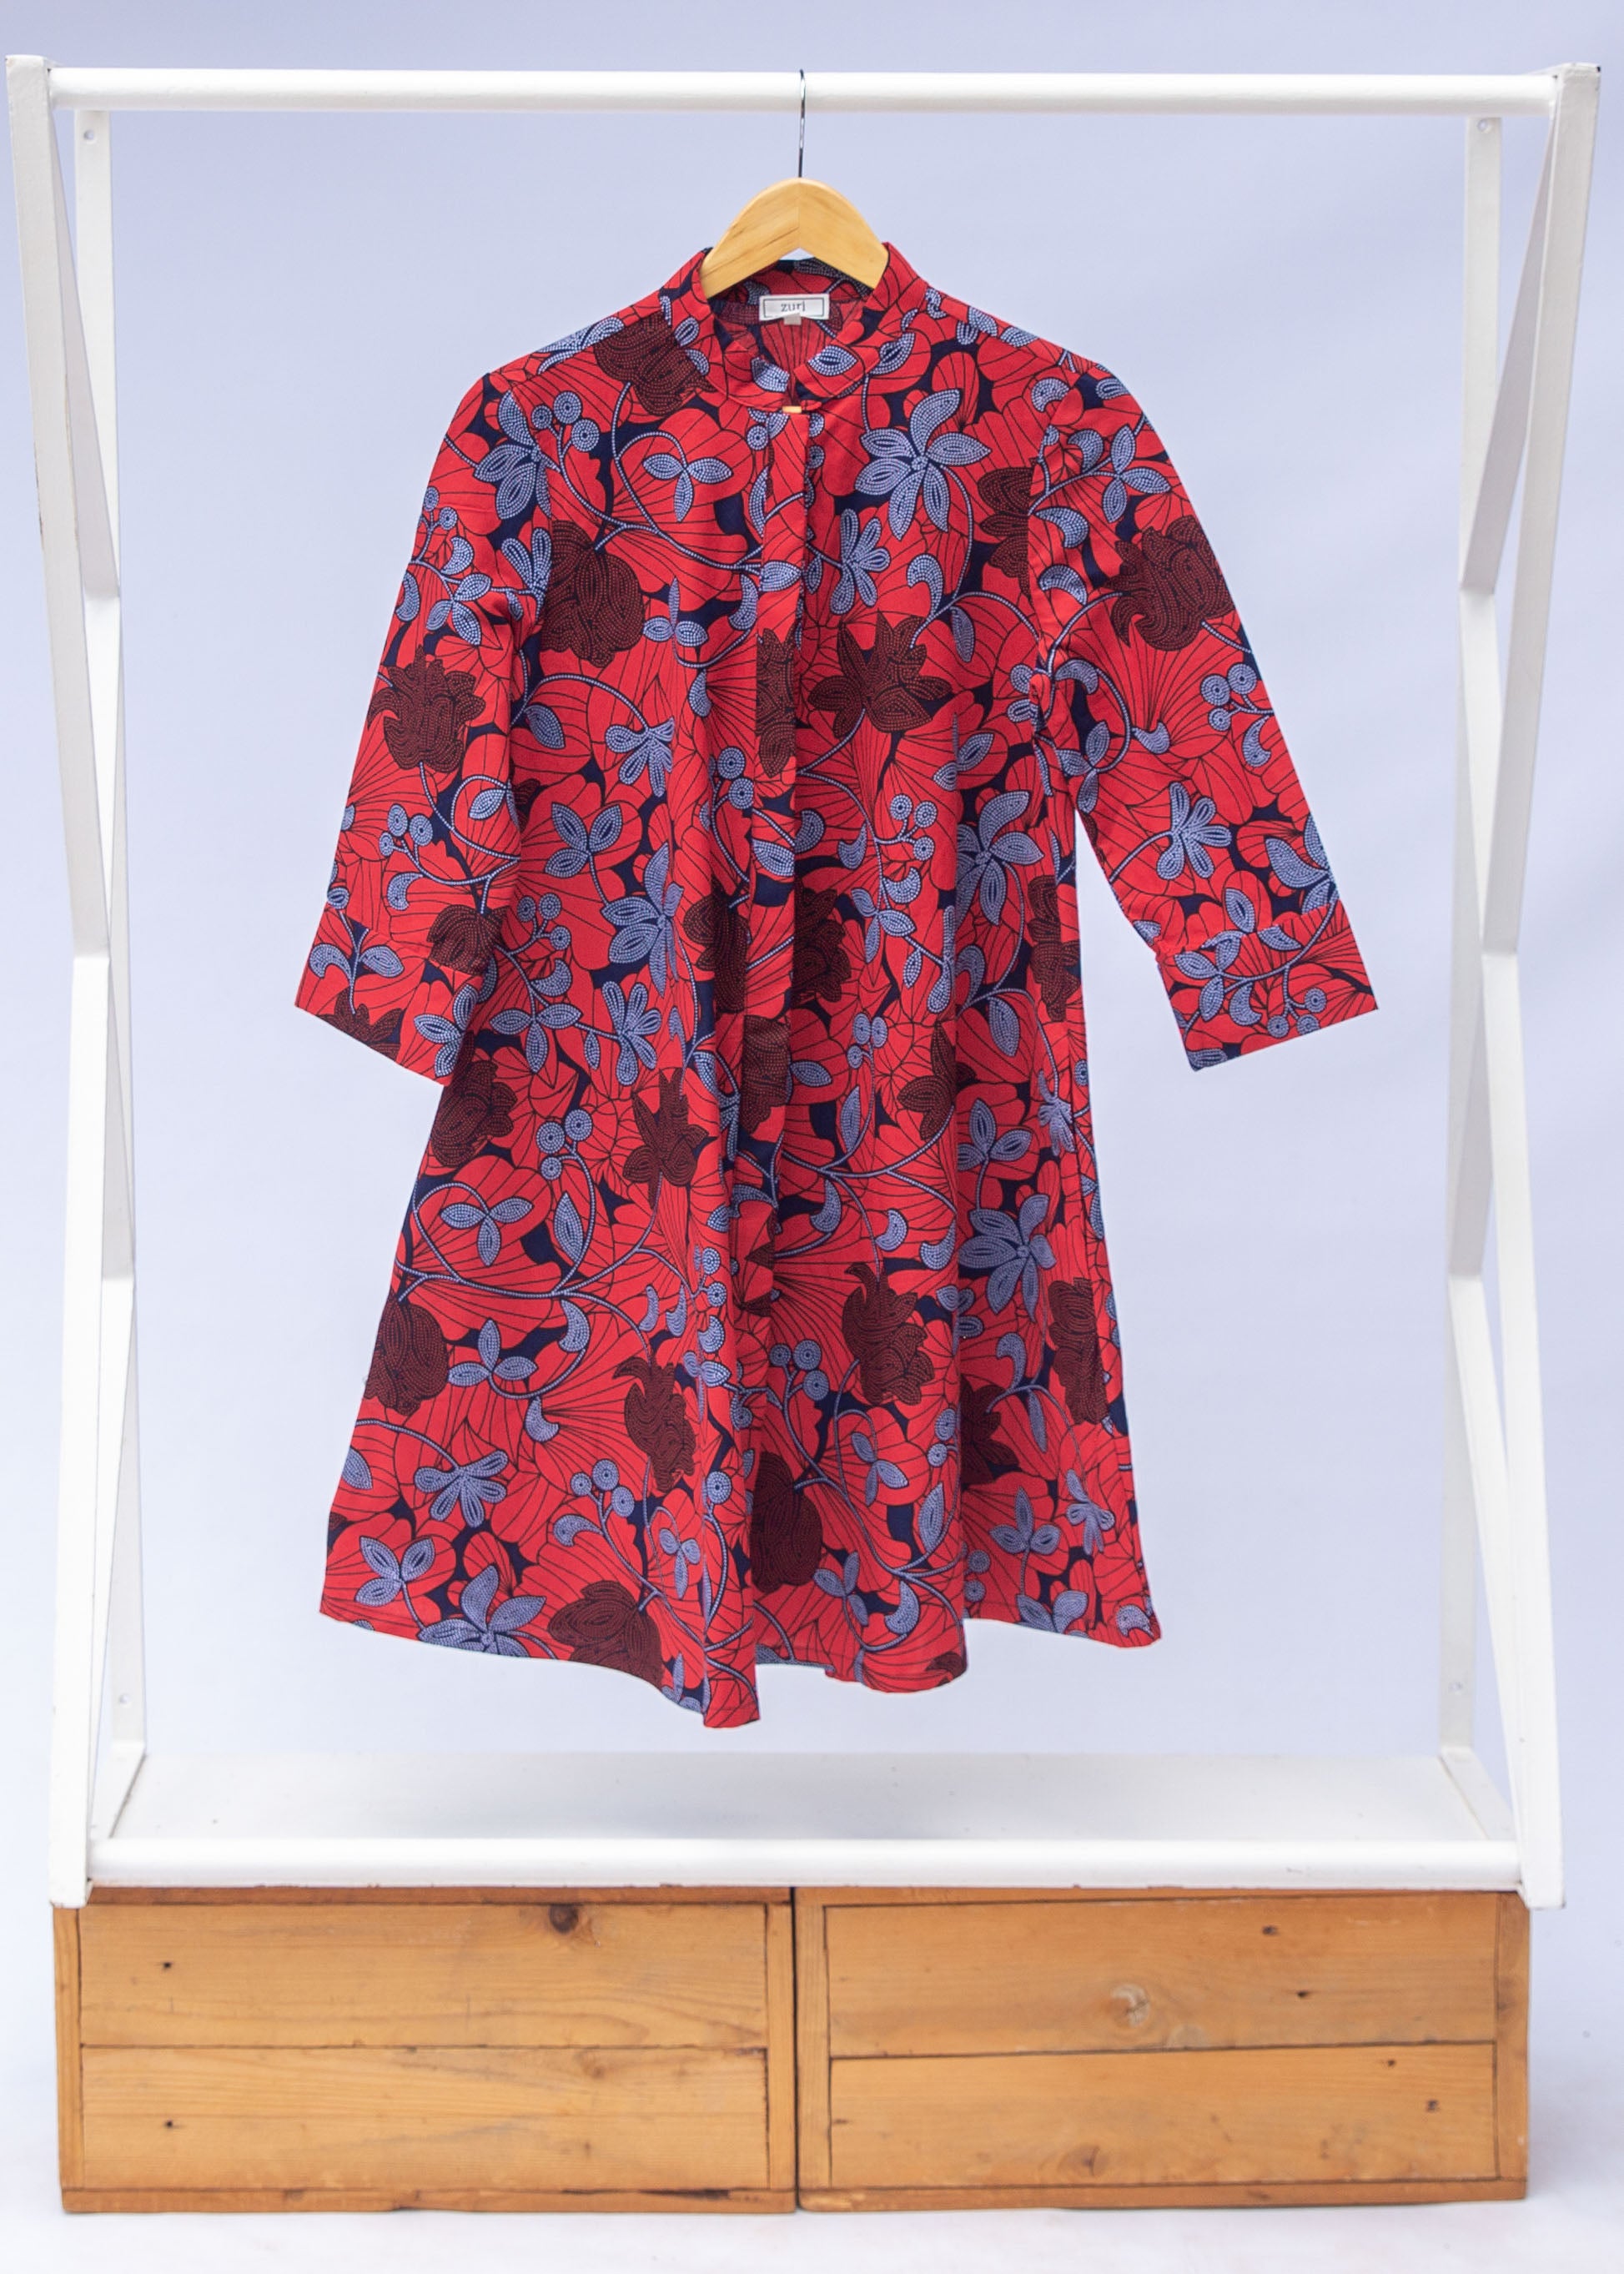 display of red dress with floral vine print.